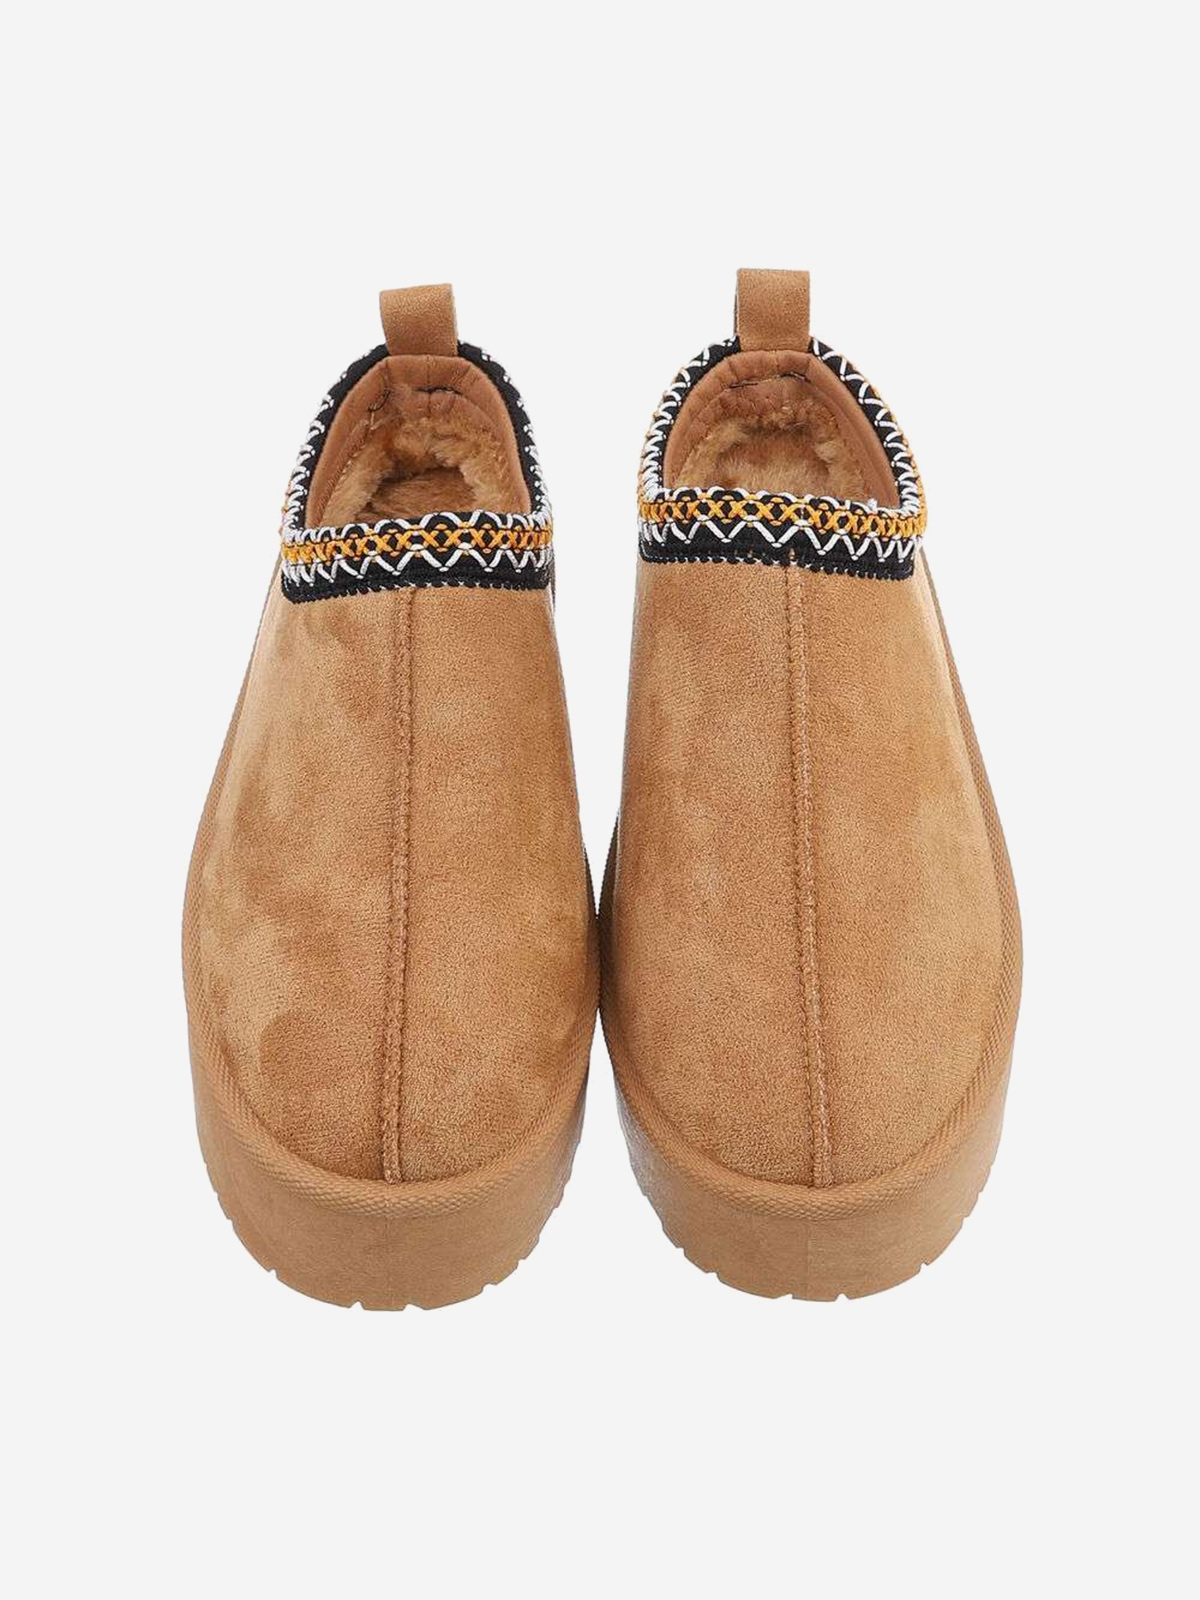 UGG style women's slippers with platform in camel